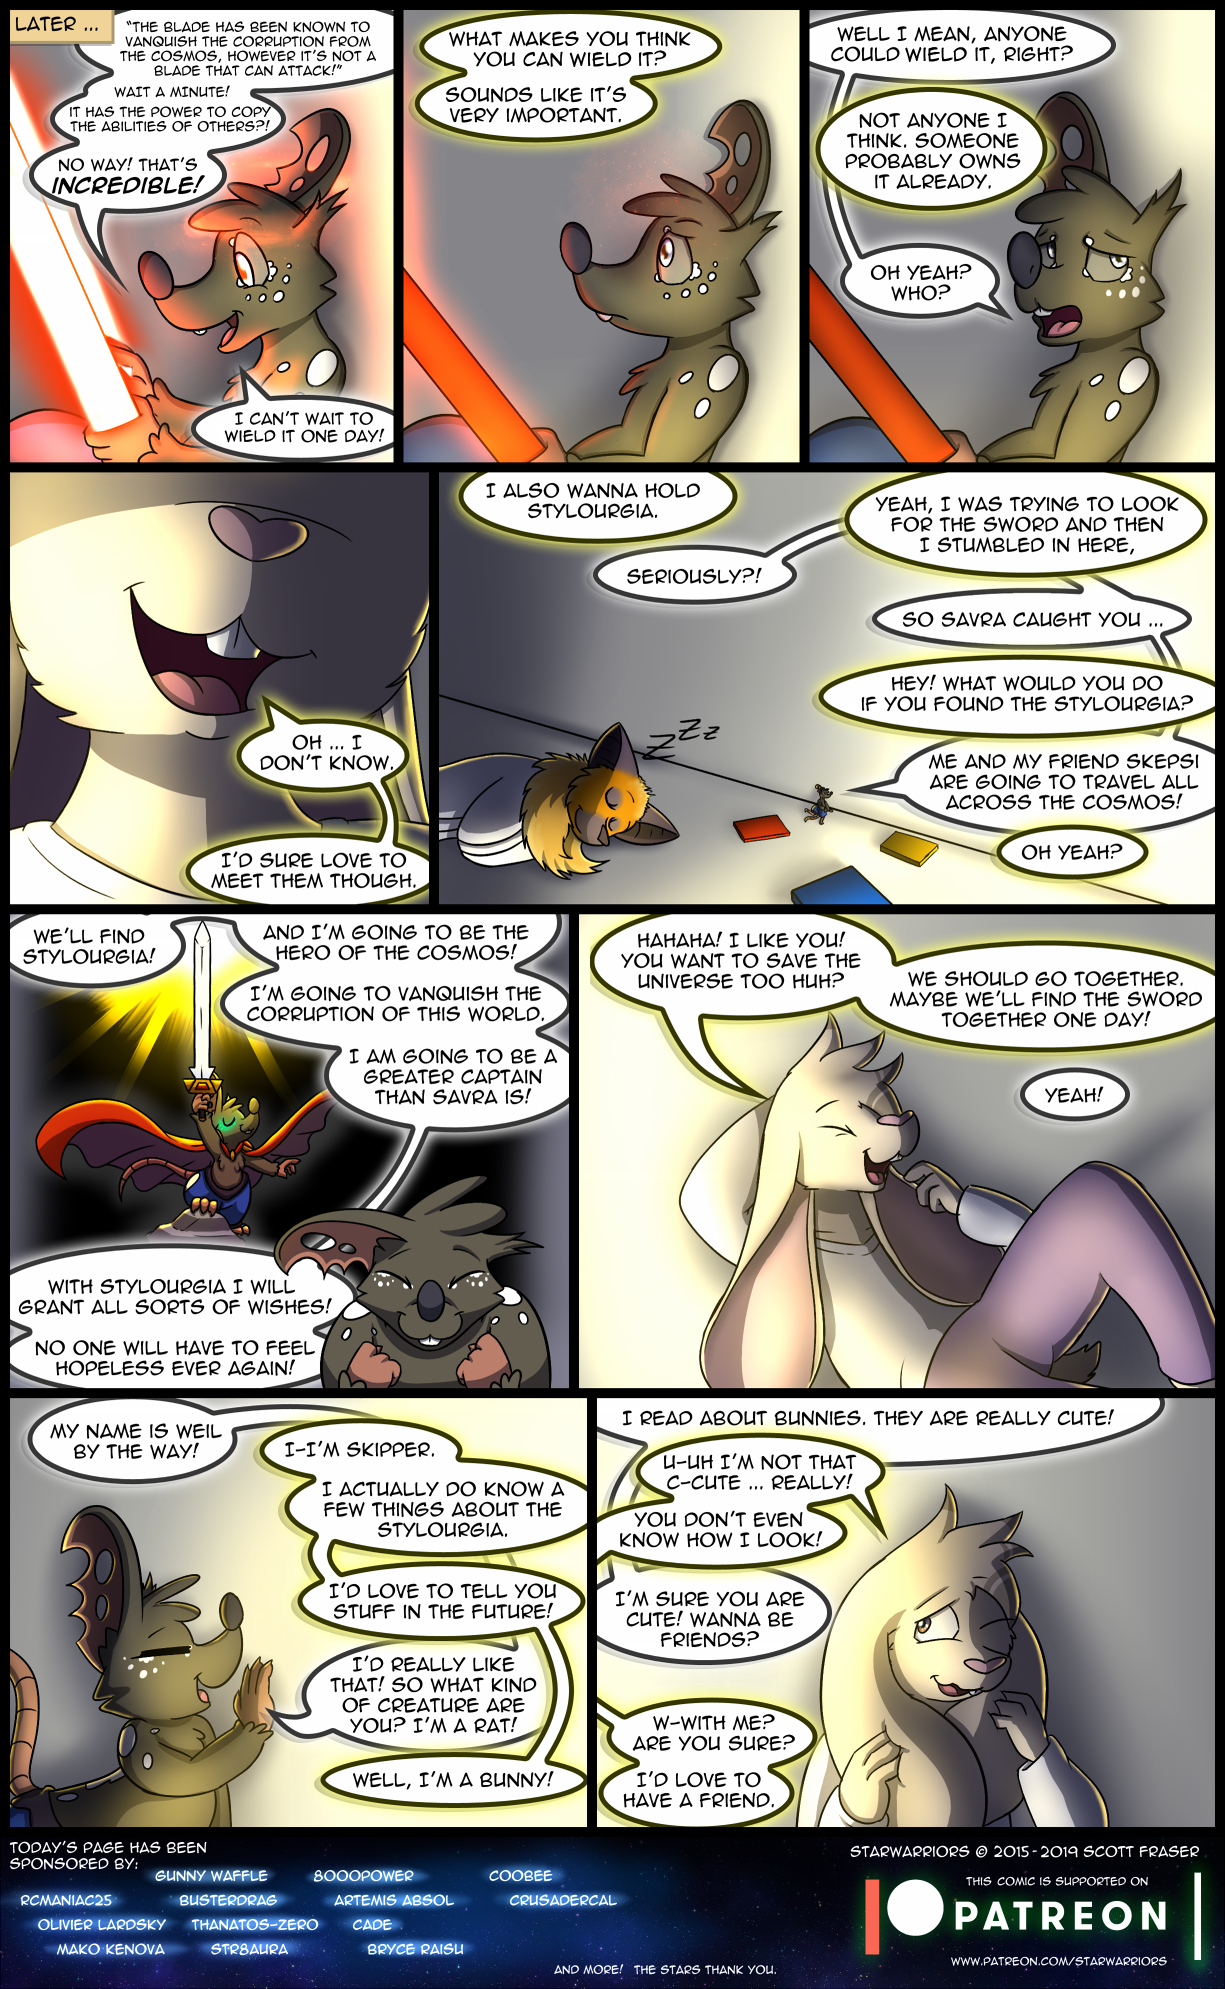 Ch4 Page 40 – Stylourgia